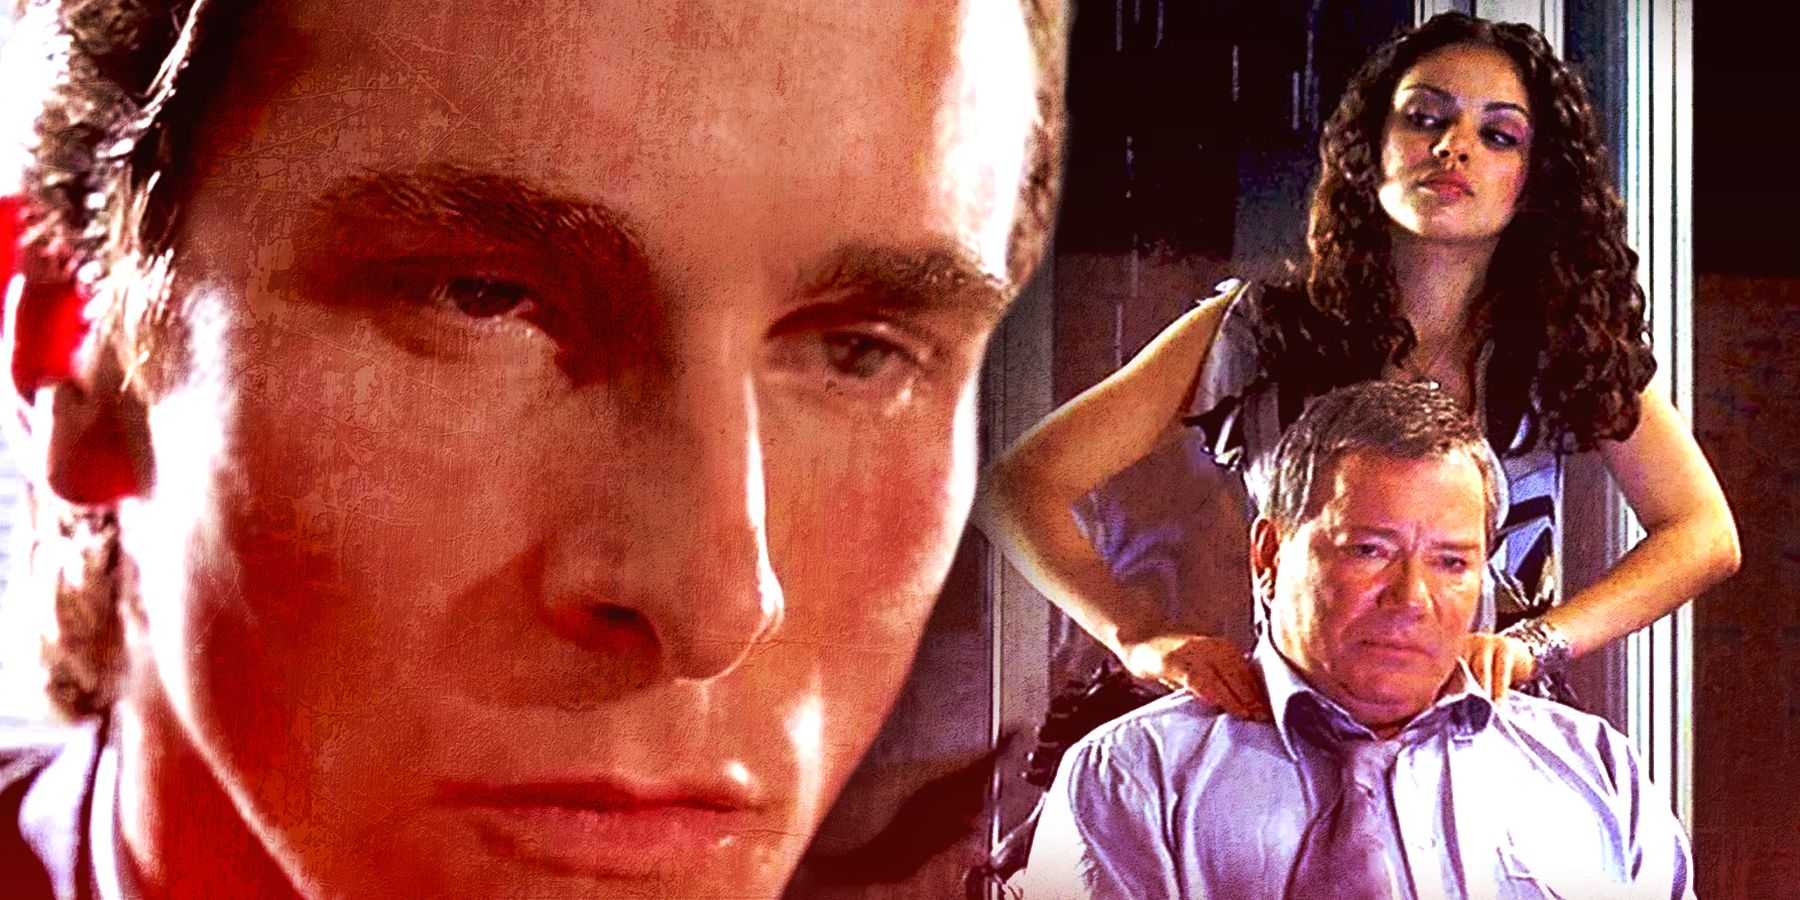 Christian Bale’s face in American Psycho with Mila Kunis and William Shatner in American Psycho 2